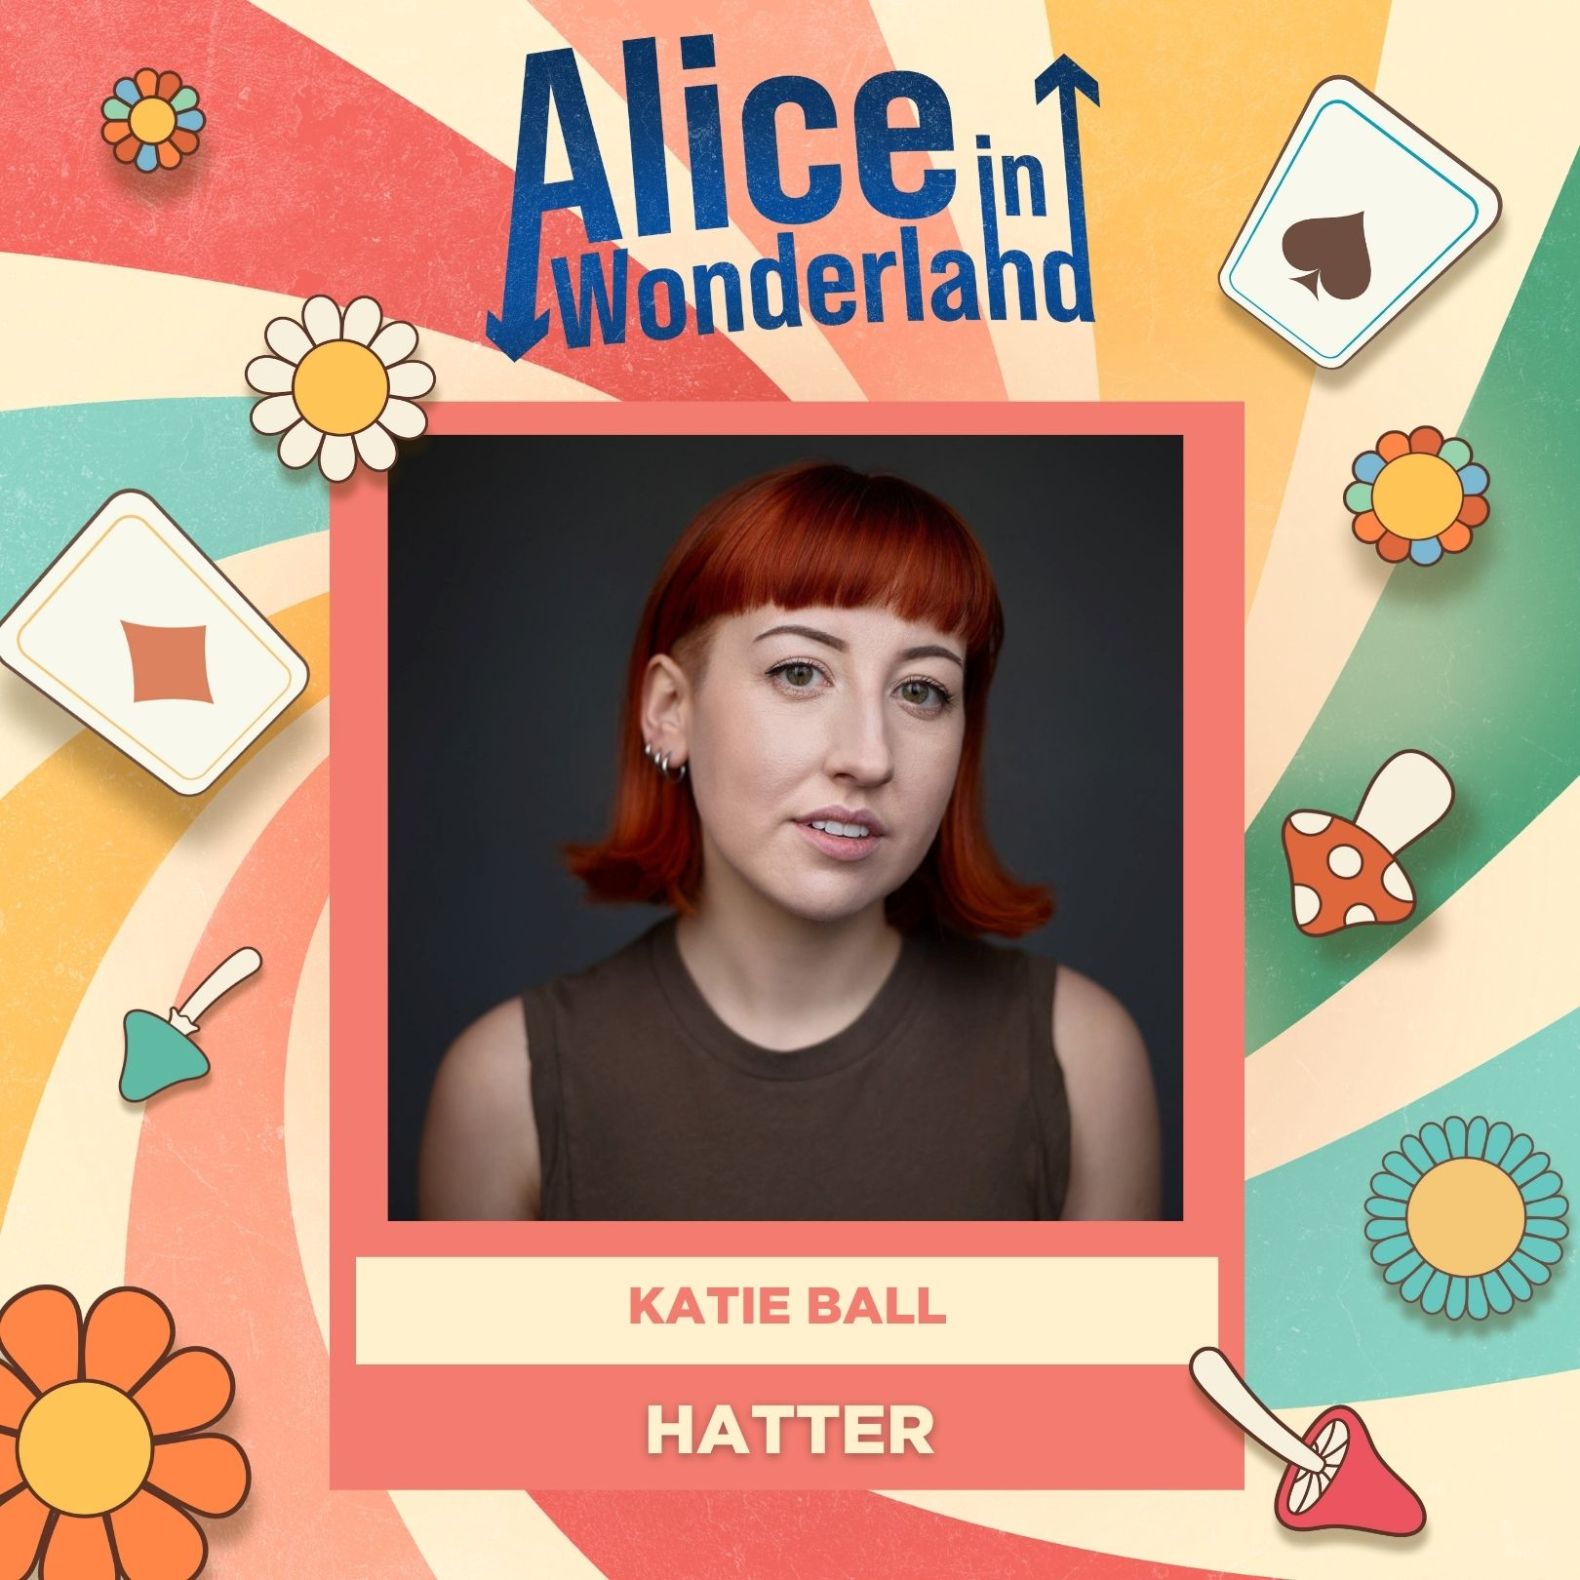 Head shot of Actor Katie Ball who plays The Hatter in Alice in Wonderland at the Dukes Theatre